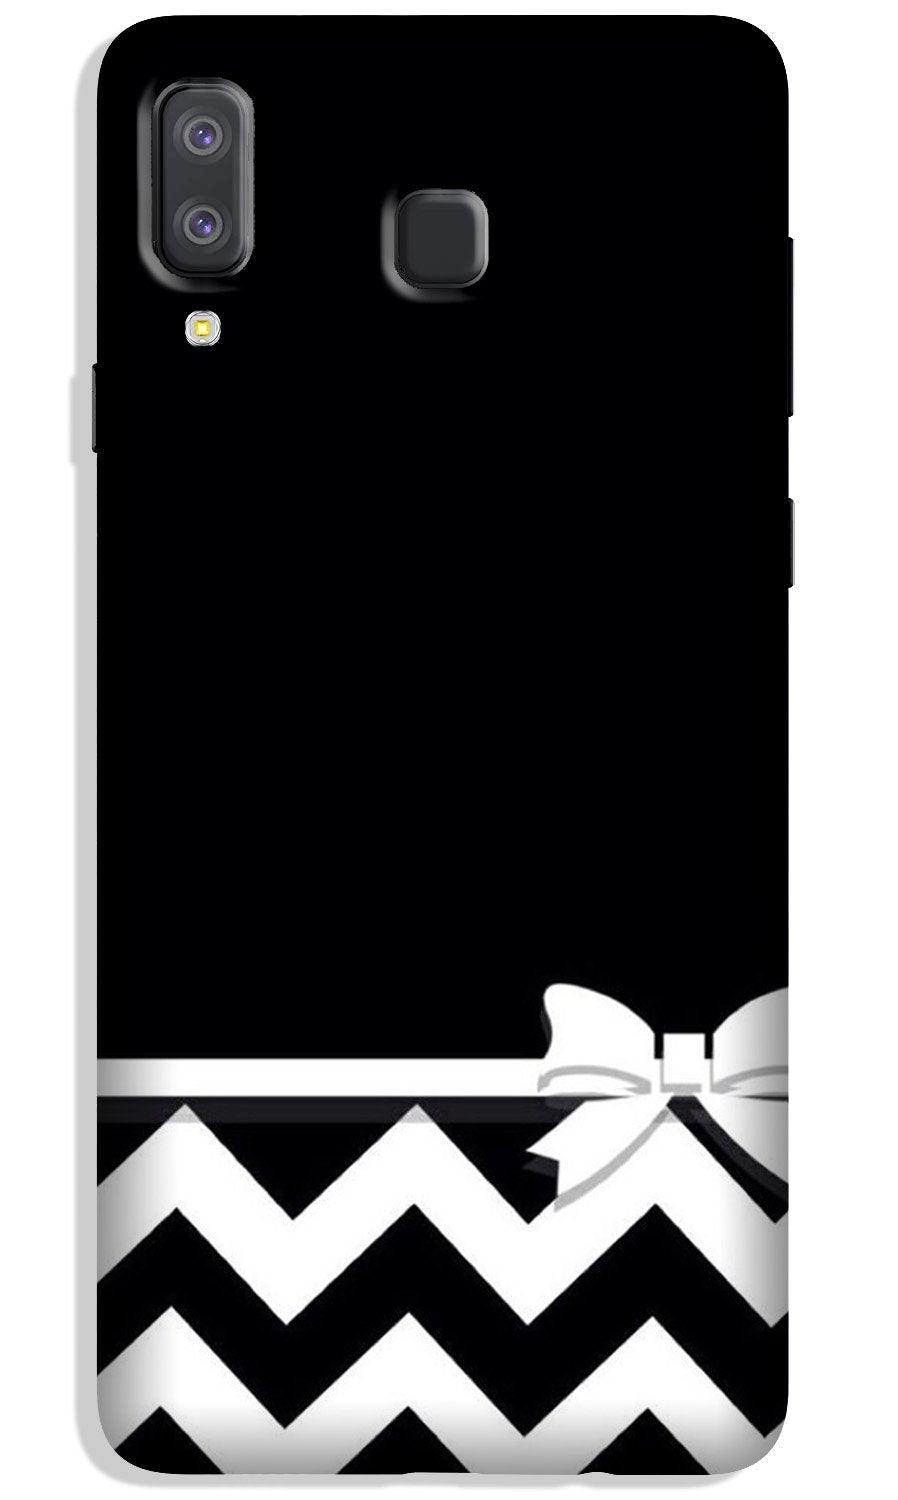 Gift Wrap7 Case for Galaxy A8 Star